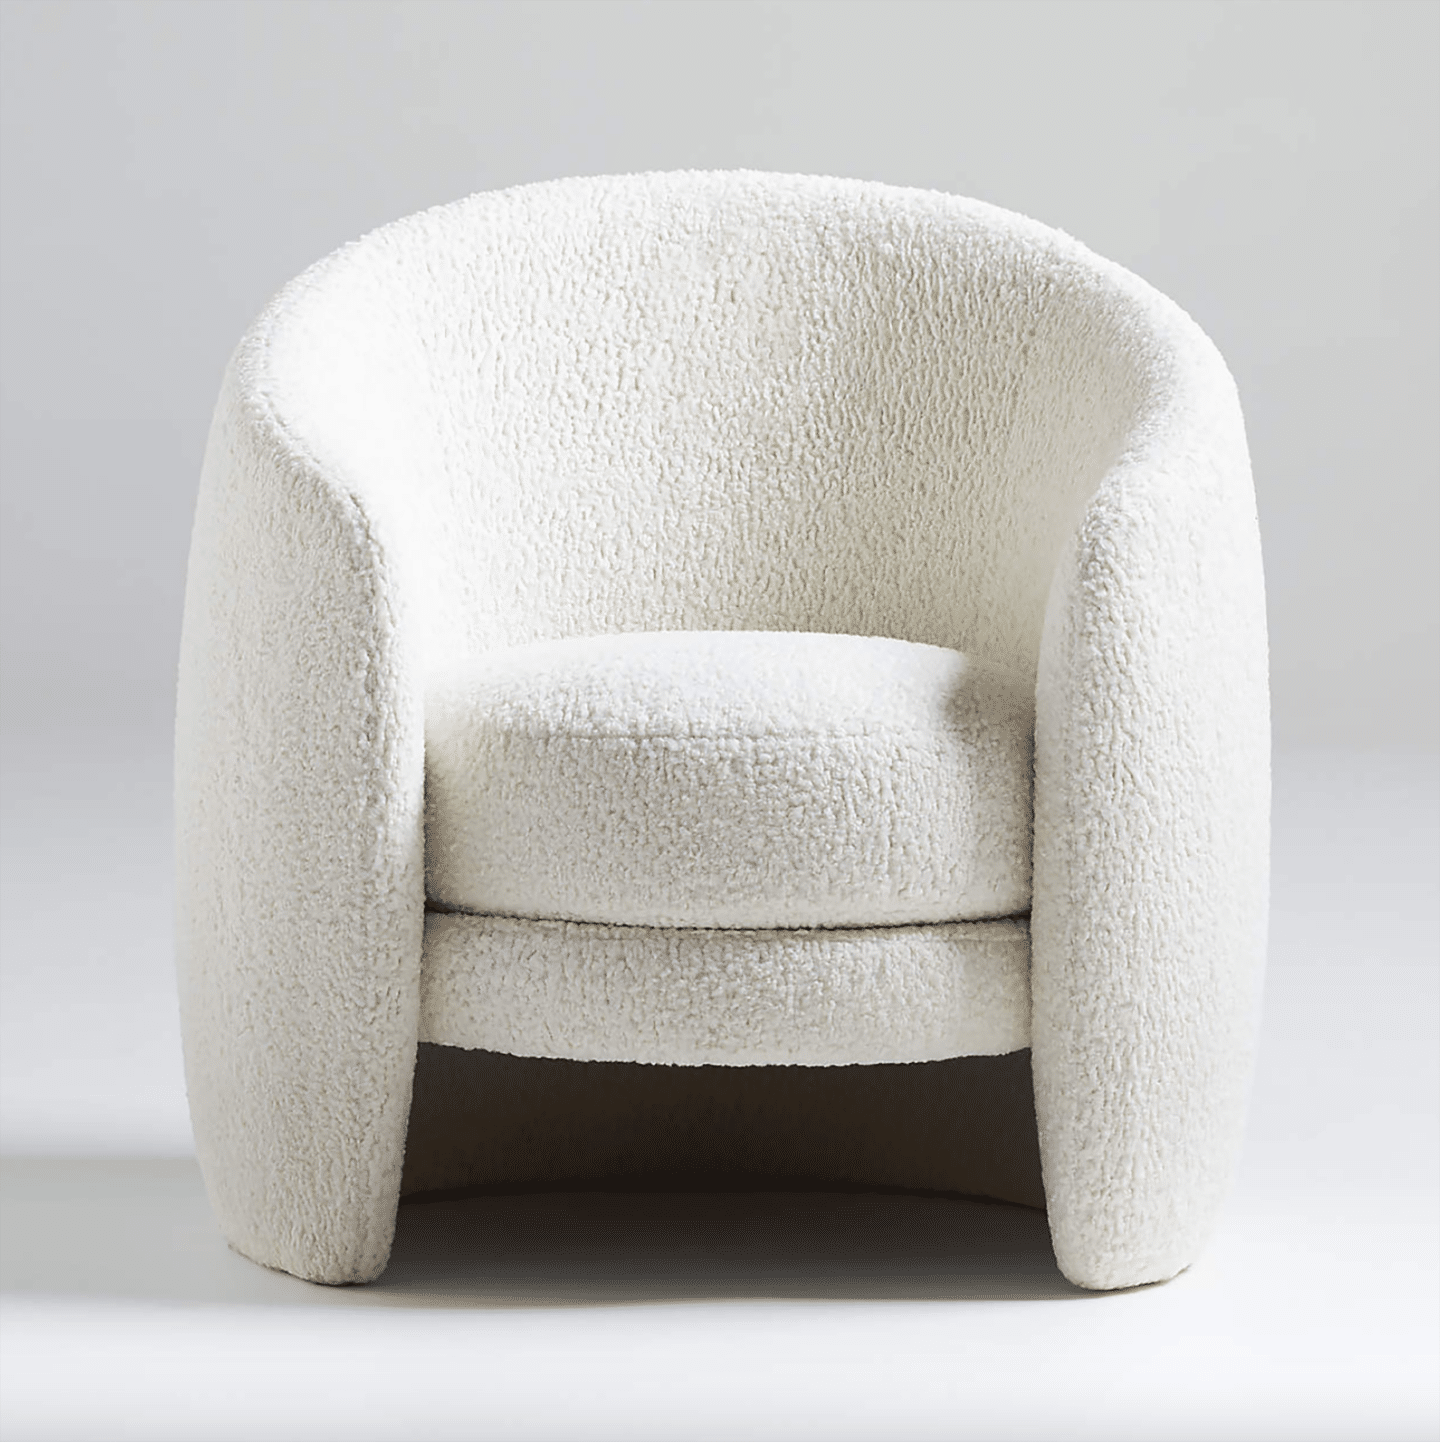 Top Sherpa accent chair picks, by home blogger What The Fab